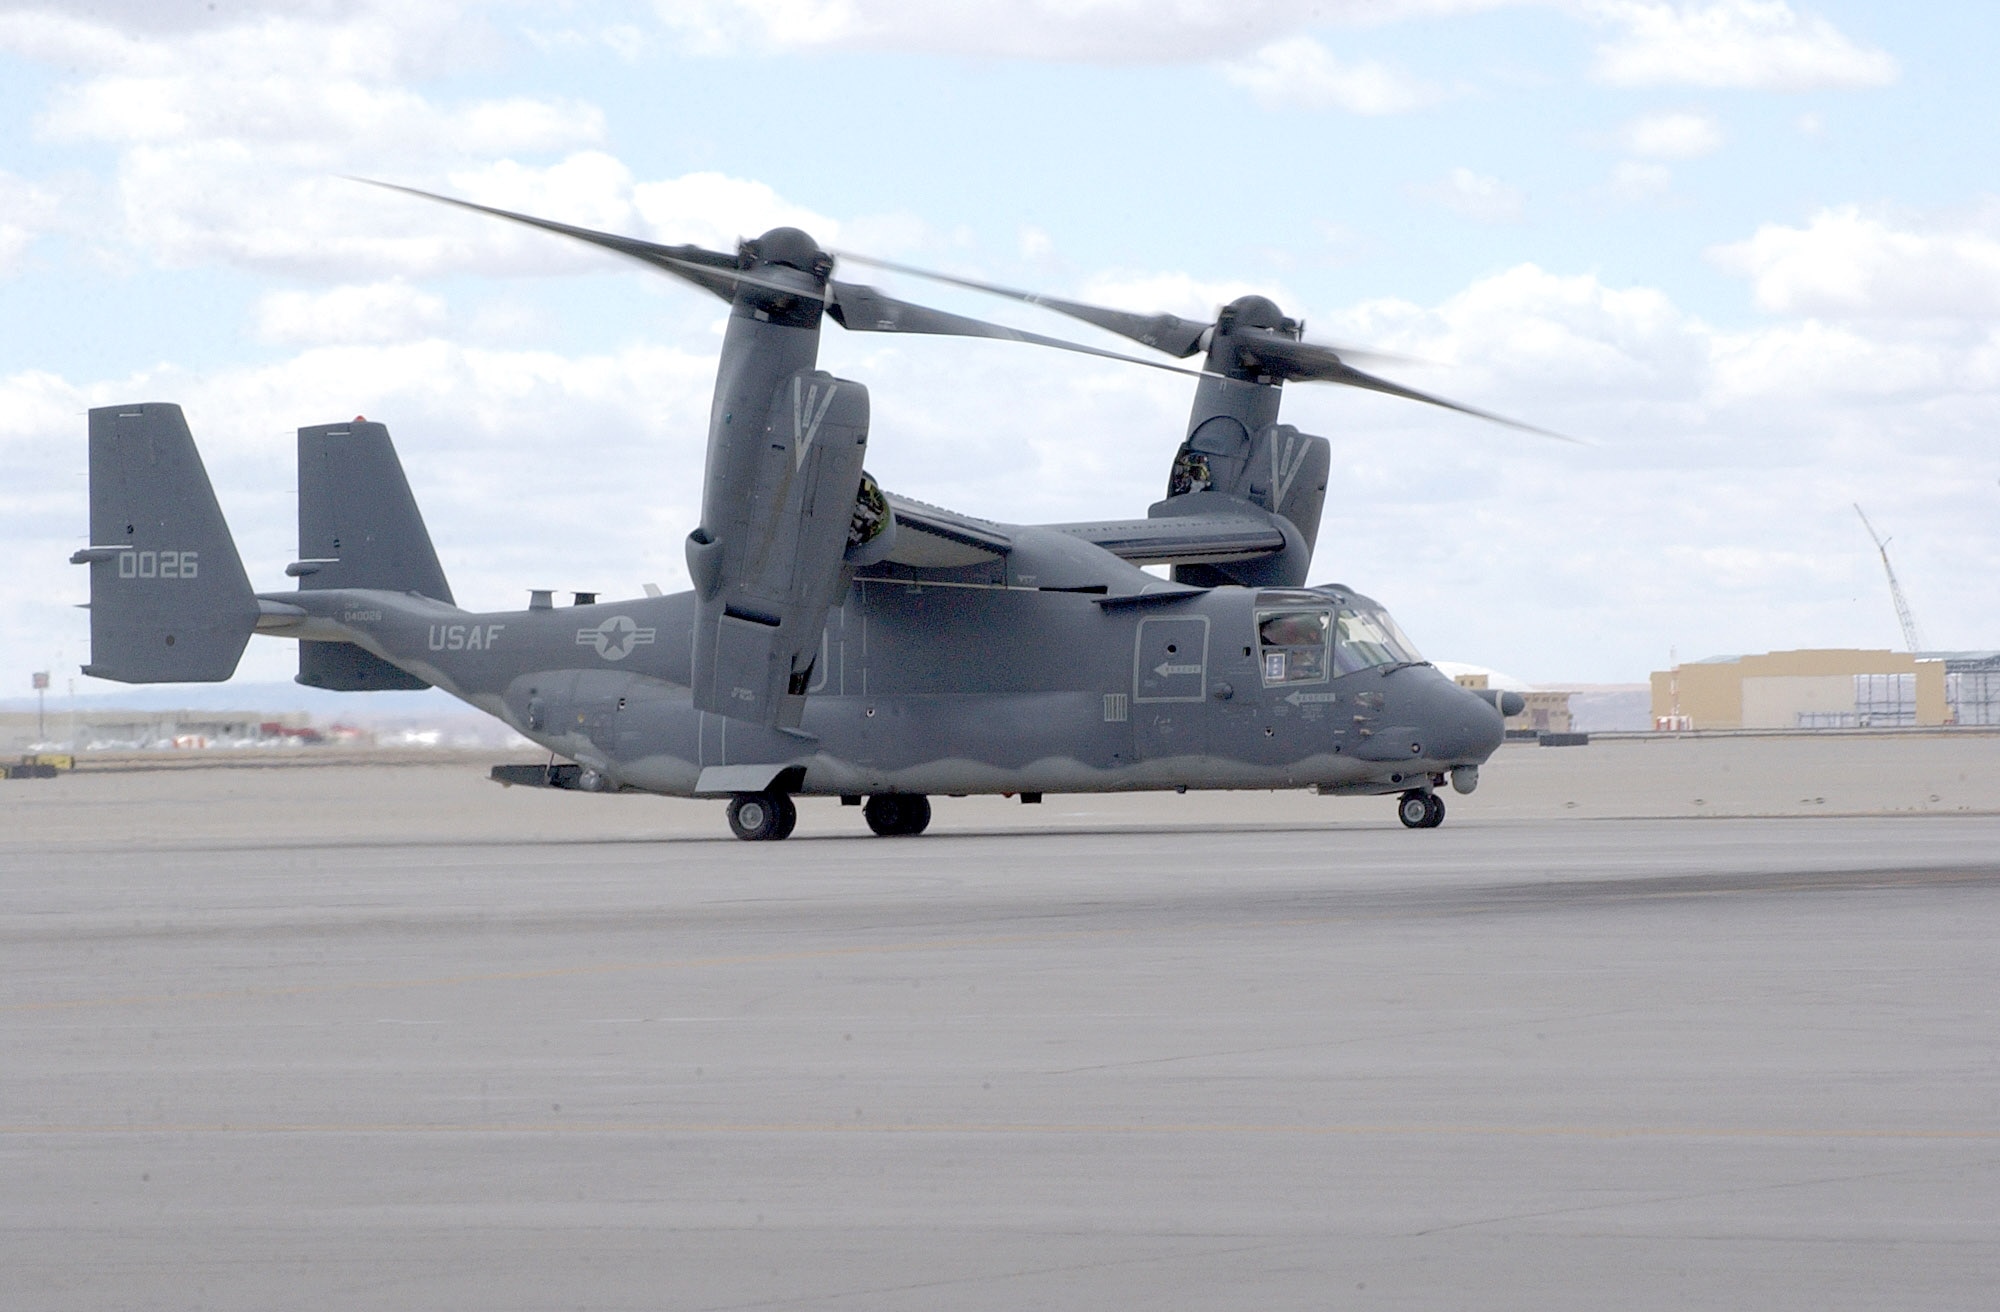 Air Force Special Operations Command's first CV-22 Osprey arrives at Kirtland Air Force Base, N.M., Monday, March 20, 2006. The aircraft will be flown by Airmen with the 58th Special Operations Wing.  (U.S. Air Force photo/Staff Sgt. Markus Maier)